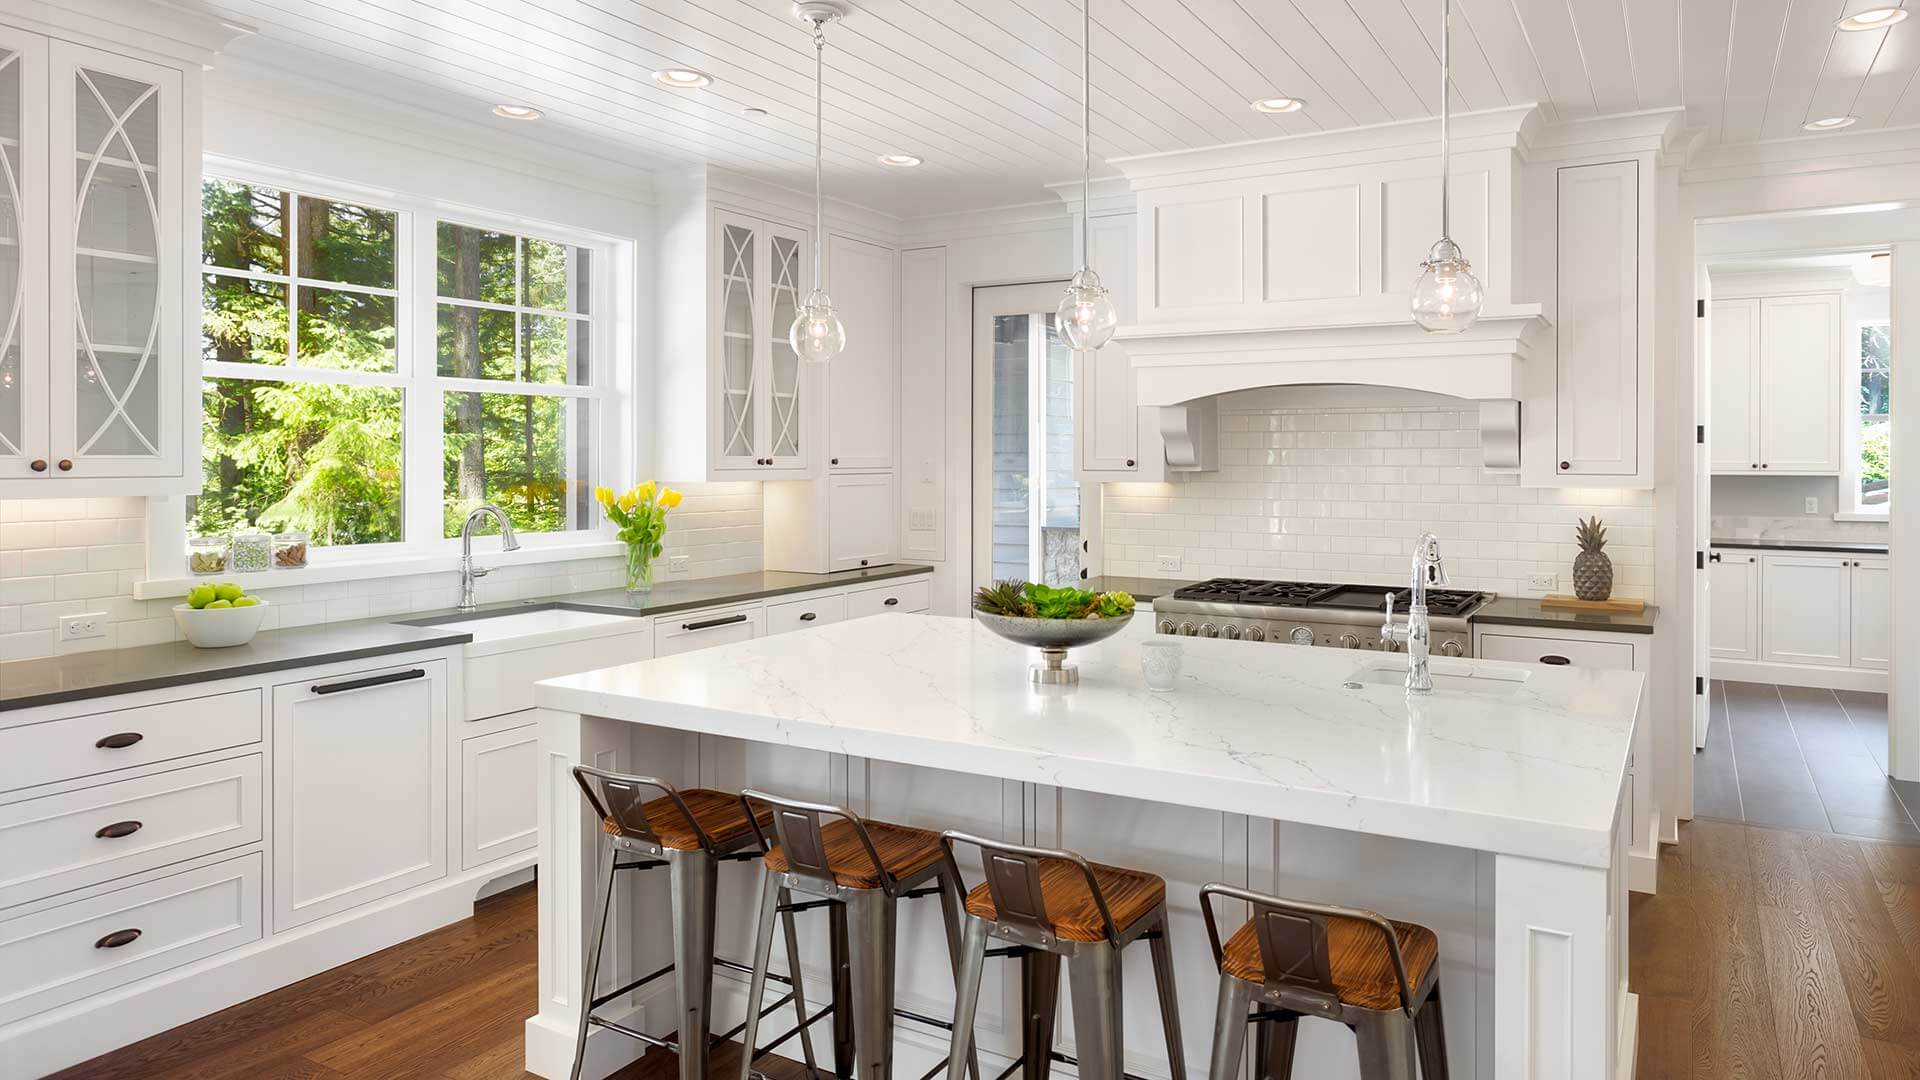 Modern renovated kitchen with a Classic Series Double Hung Window above the kitchen sink.